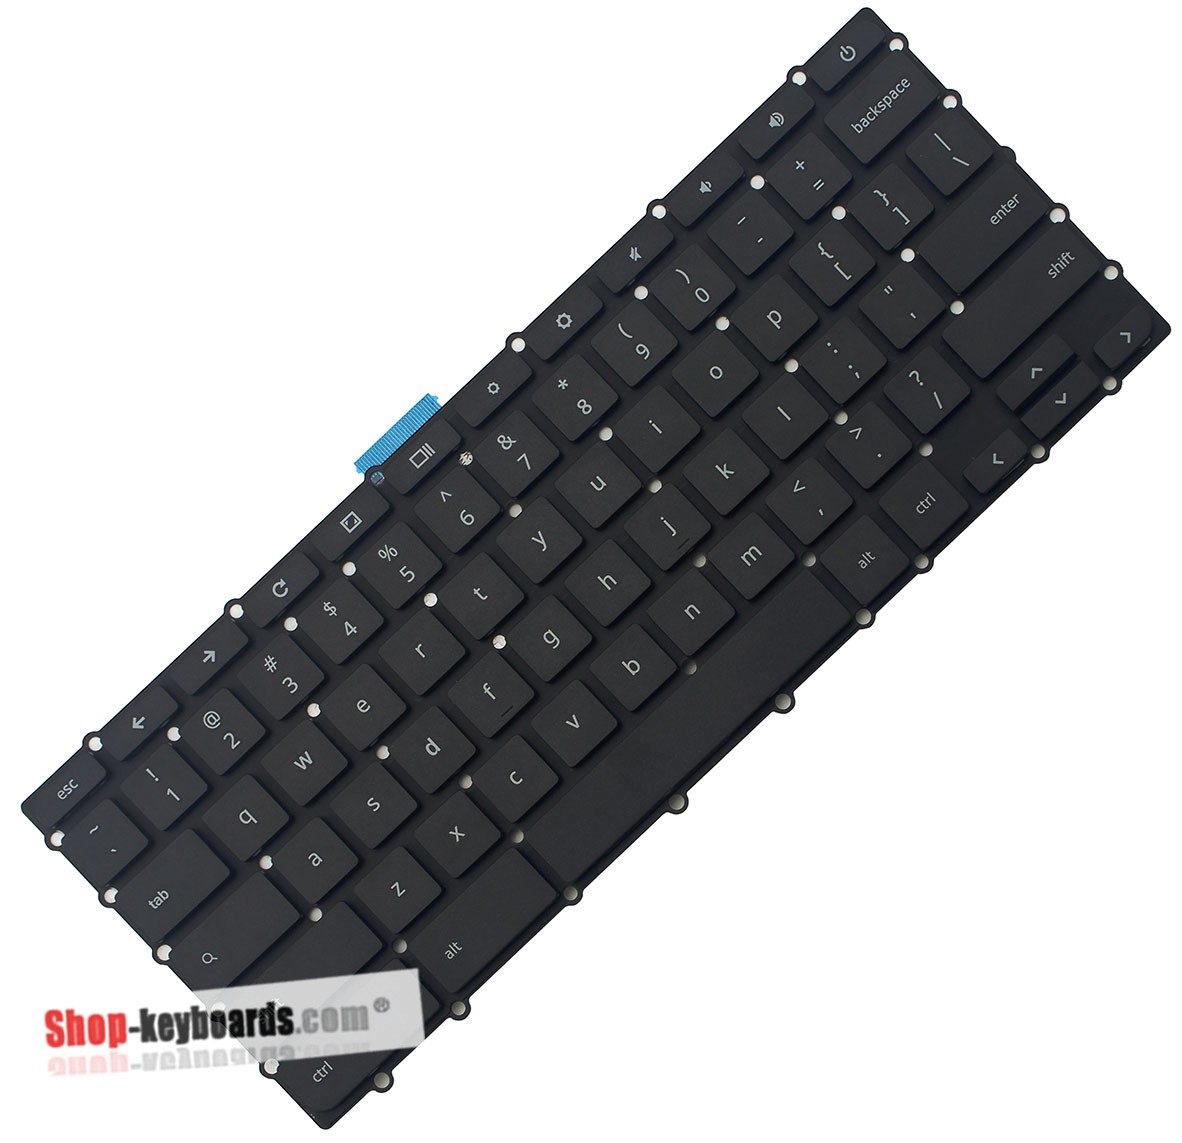 Lenovo 100S Chromebook Type 80QN Keyboard replacement